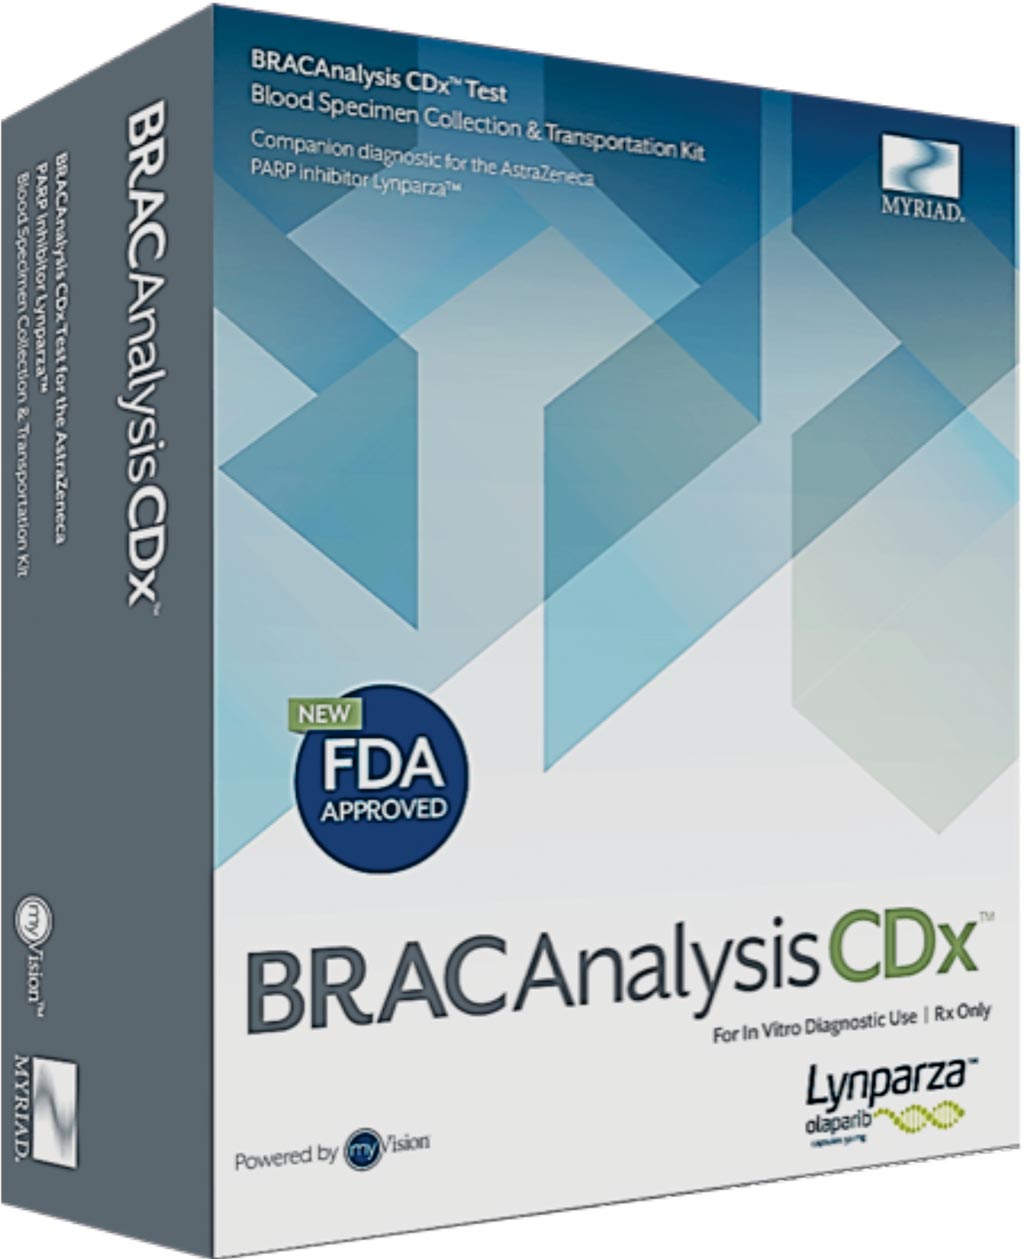 Image: The FDA-approved BRACAnalysis CDx test as a companion diagnostic (Photo courtesy of Myriad Genetics).